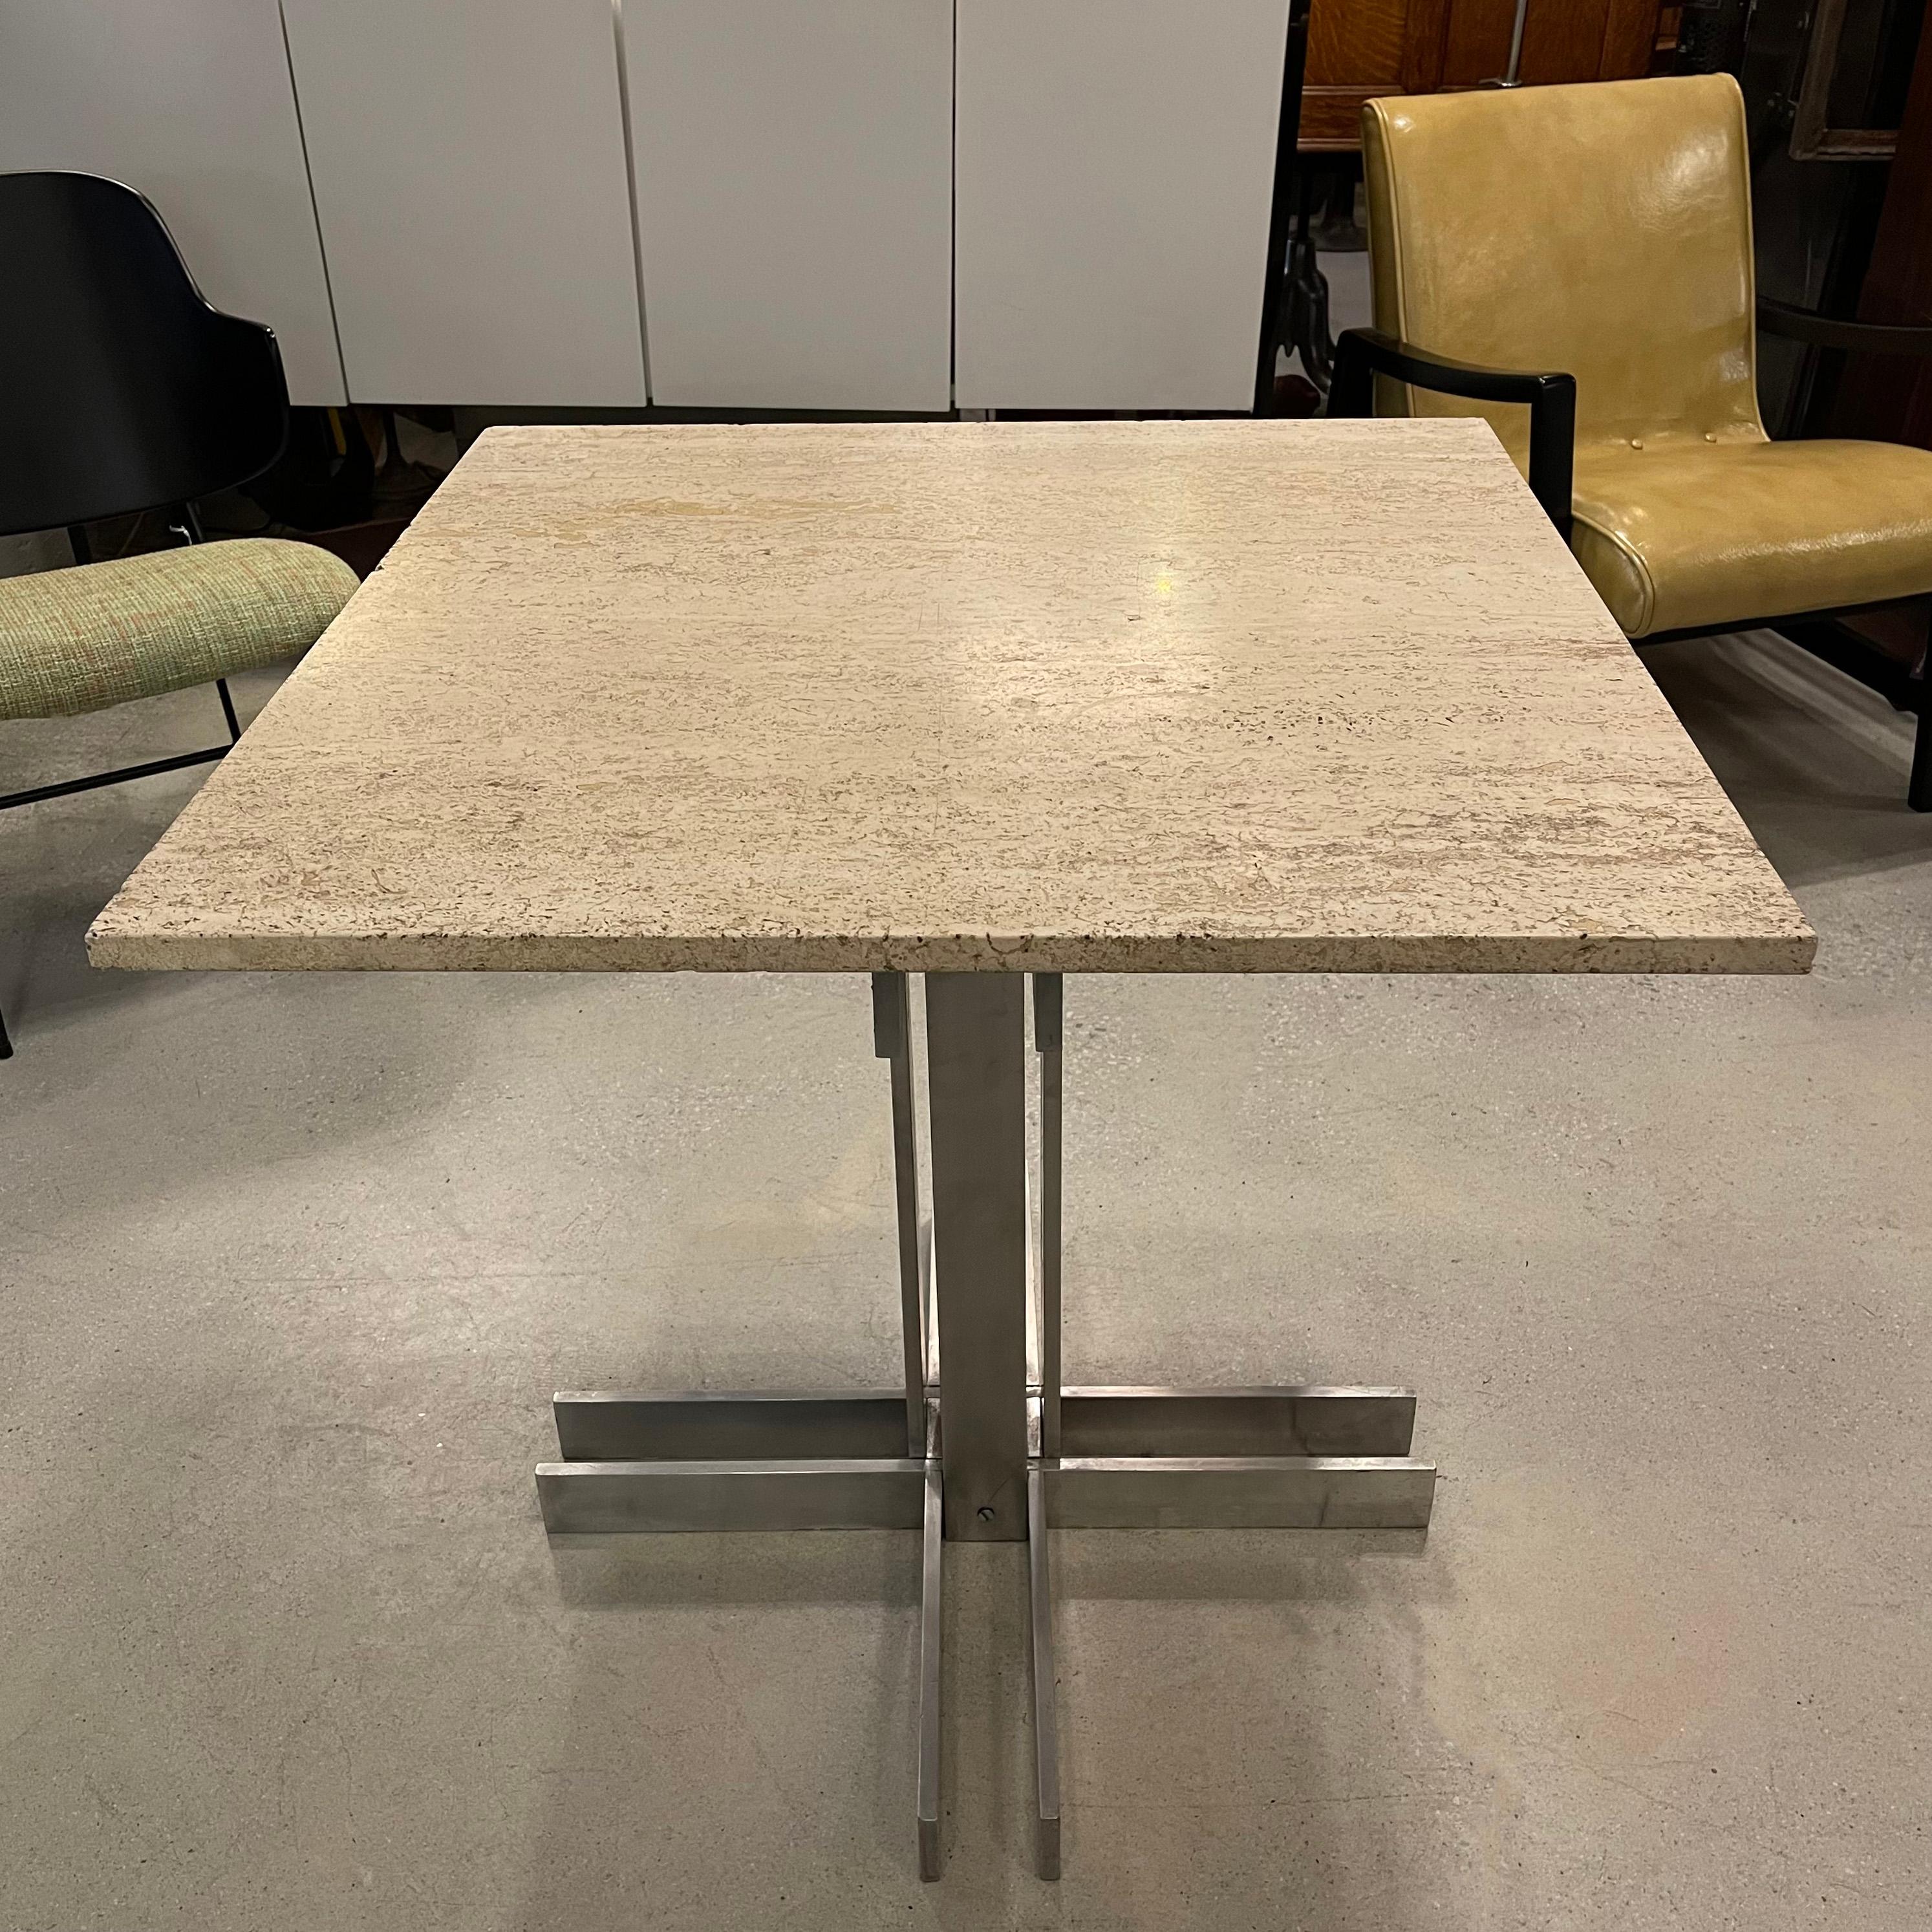 Post modern, Memphis influenced, small dining or bistro café table features a 30 inch square travertine top paired with a post-modern, architectural, machined-aluminum, pedestal base.